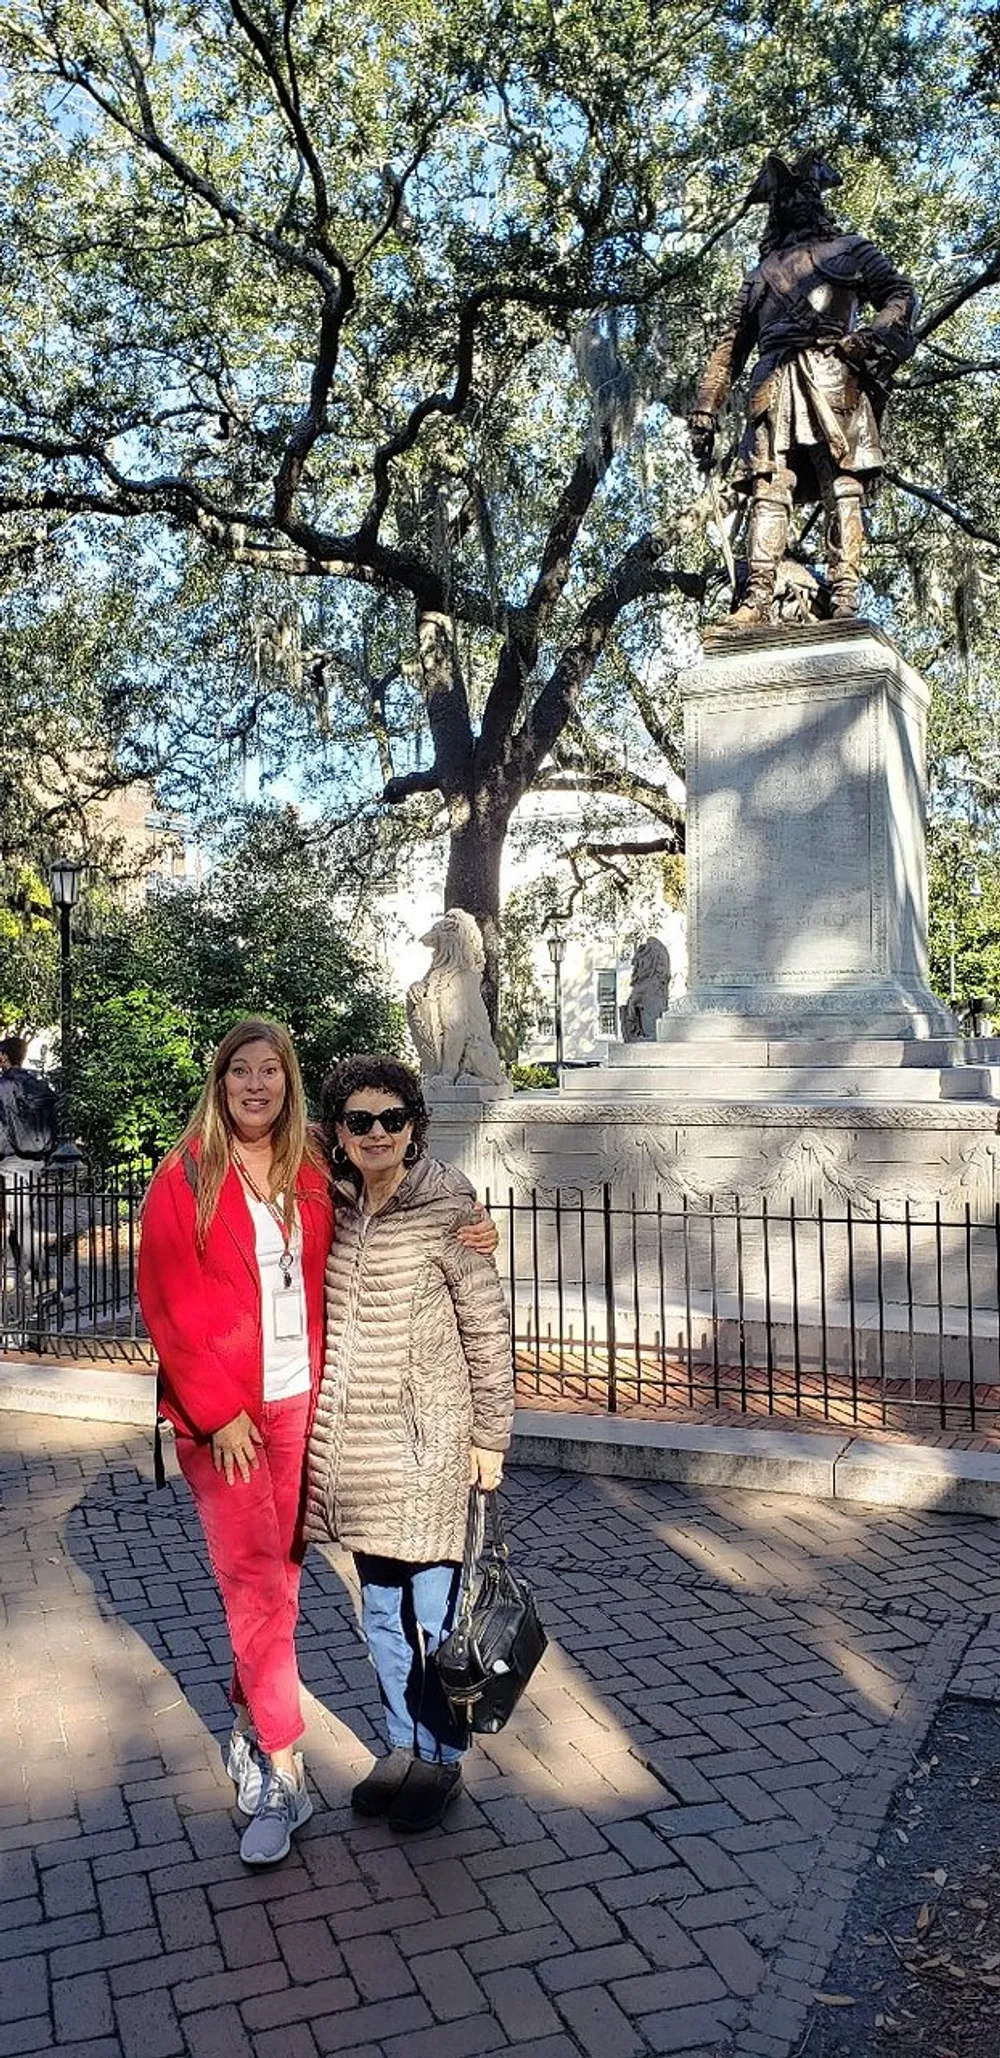 Two individuals are posing for a photo in a park with a statue on a pedestal and trees draped with Spanish moss in the background